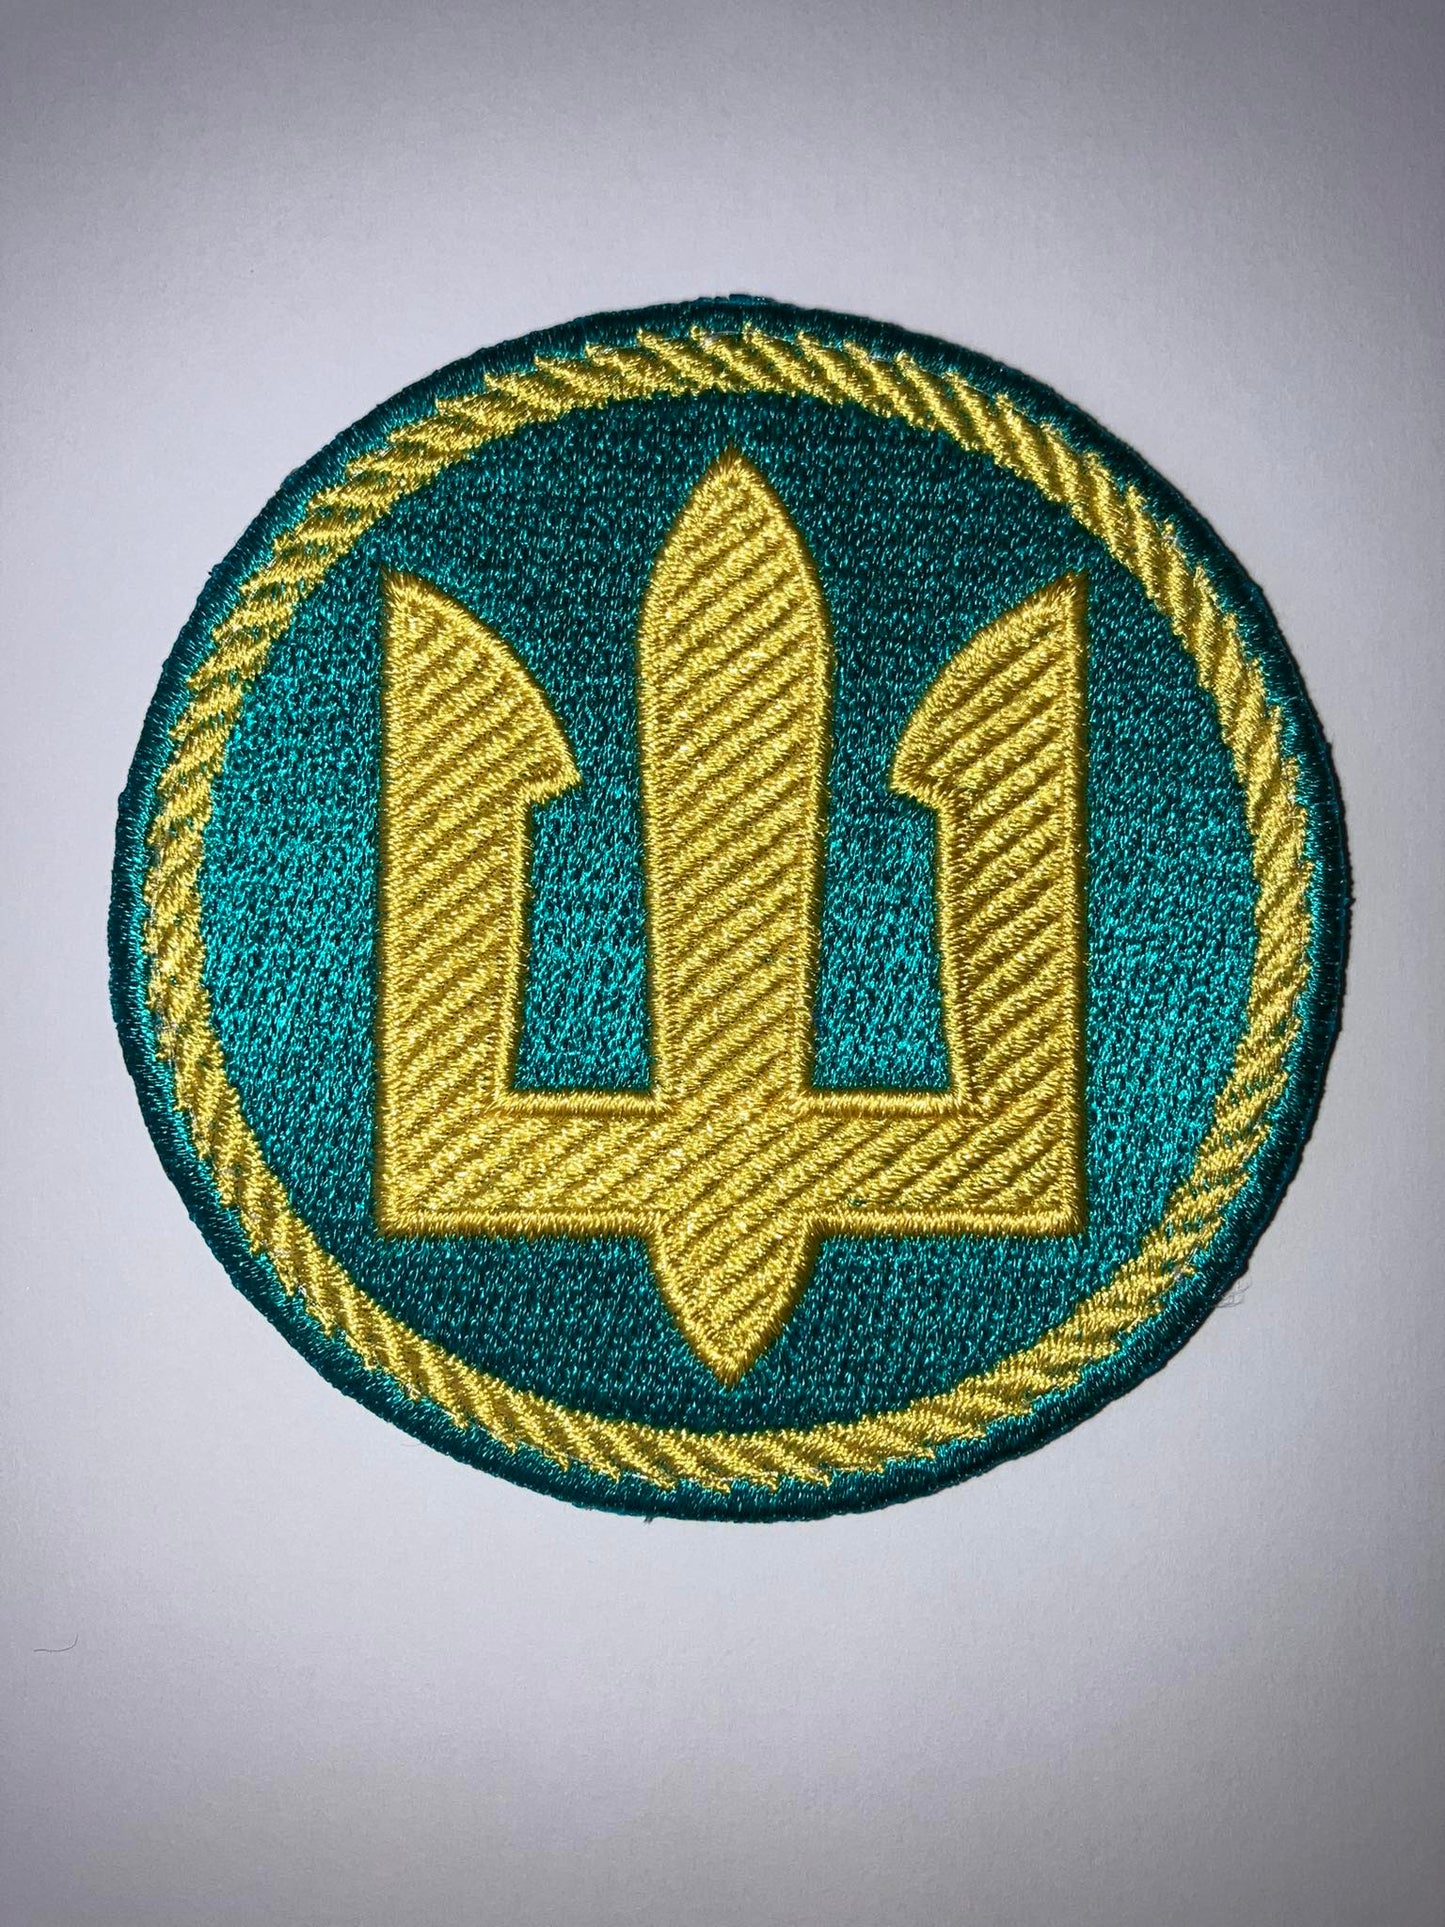 Donate to receive: Patch - Marines